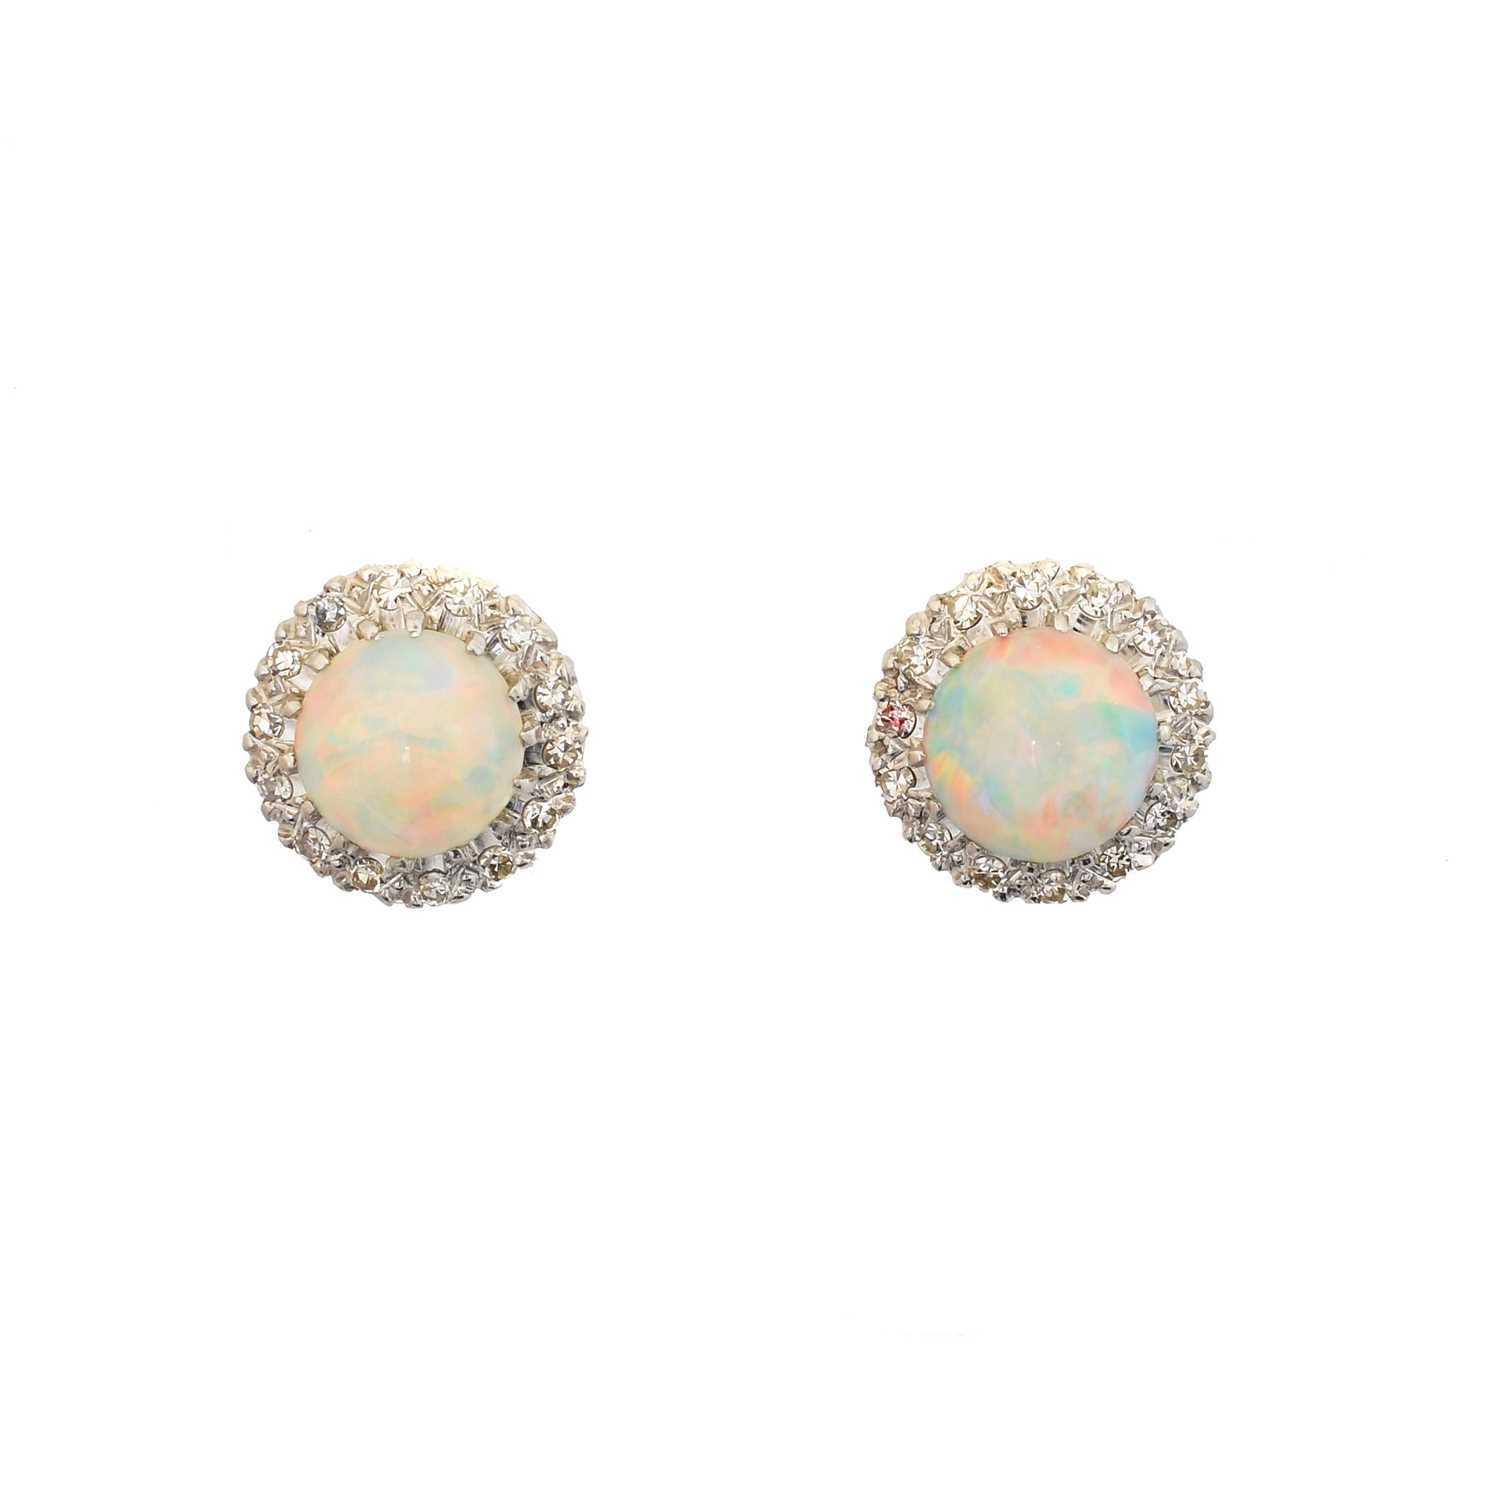 Lot 37 - A pair of opal and diamond earrings